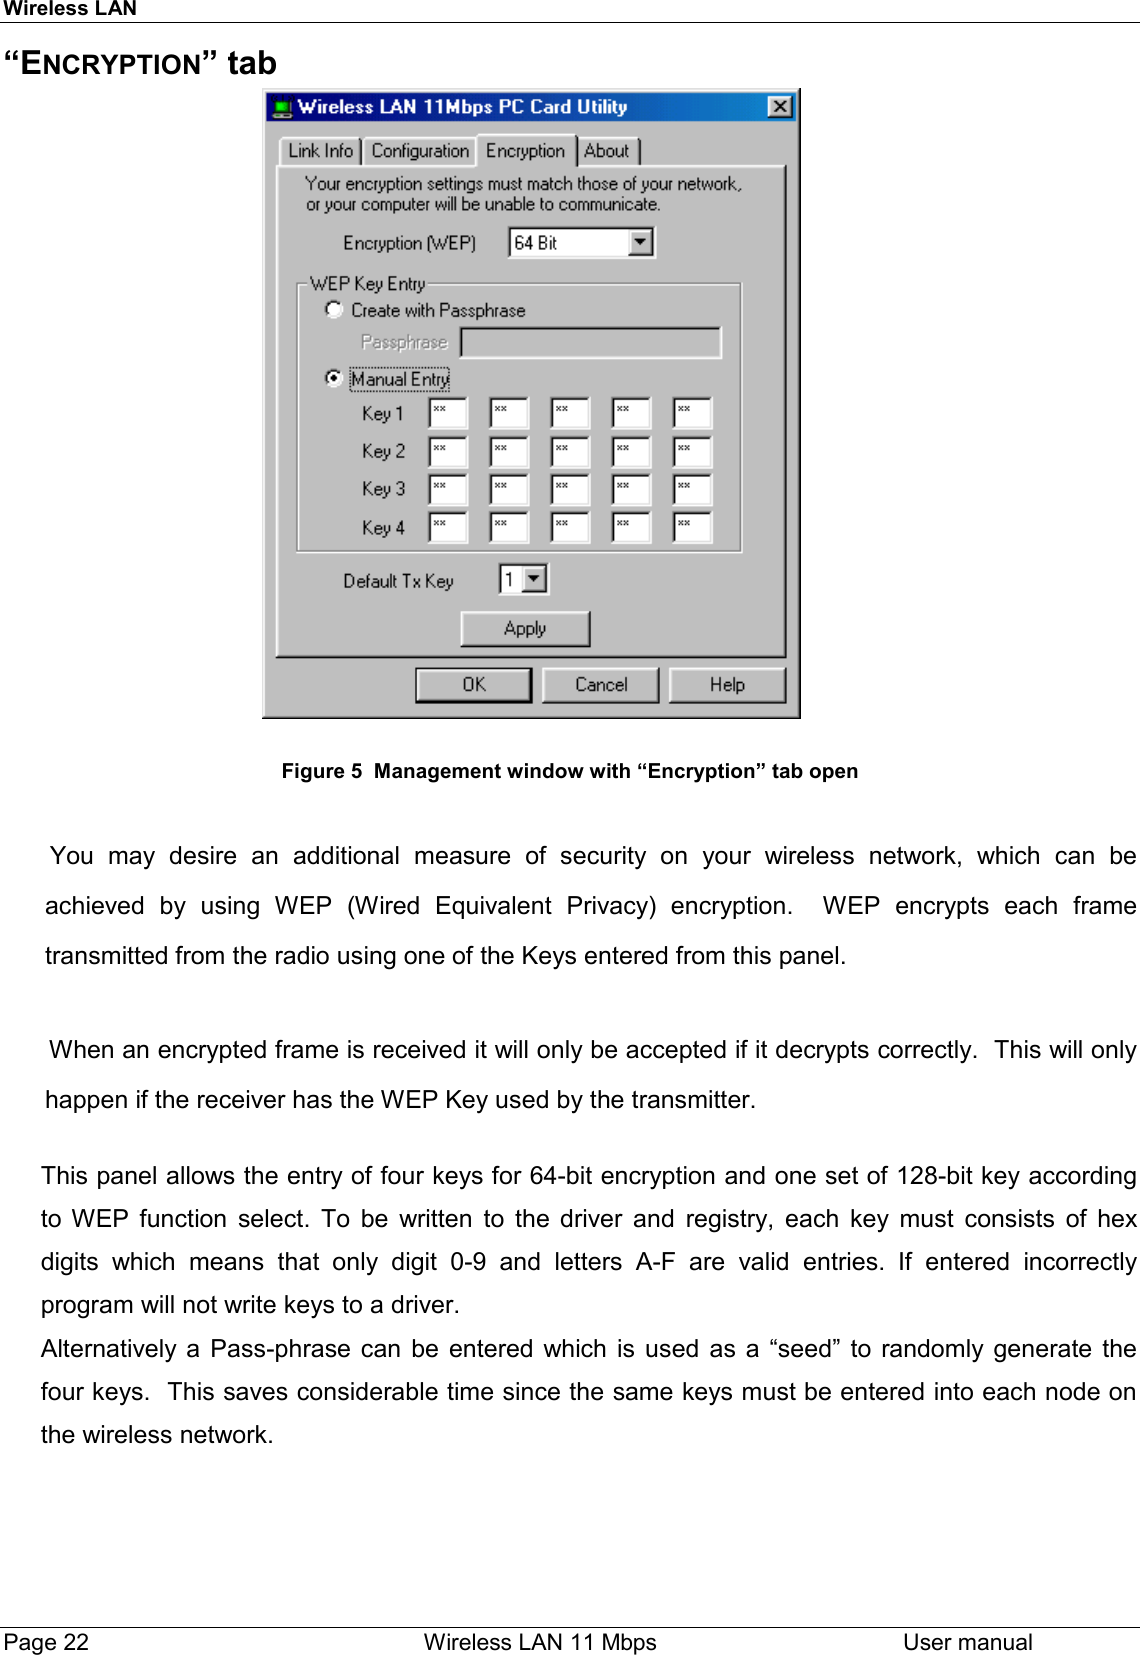 Wireless LANPage 22    Wireless LAN 11 Mbps User manual“ENCRYPTION” tab                                                        Figure 5  Management window with “Encryption” tab open You may desire an additional measure of security on your wireless network, which can beachieved by using WEP (Wired Equivalent Privacy) encryption.  WEP encrypts each frametransmitted from the radio using one of the Keys entered from this panel.When an encrypted frame is received it will only be accepted if it decrypts correctly.  This will onlyhappen if the receiver has the WEP Key used by the transmitter.This panel allows the entry of four keys for 64-bit encryption and one set of 128-bit key accordingto WEP function select. To be written to the driver and registry, each key must consists of hexdigits which means that only digit 0-9 and letters A-F are valid entries. If entered incorrectlyprogram will not write keys to a driver.Alternatively a Pass-phrase can be entered which is used as a “seed” to randomly generate thefour keys.  This saves considerable time since the same keys must be entered into each node onthe wireless network.